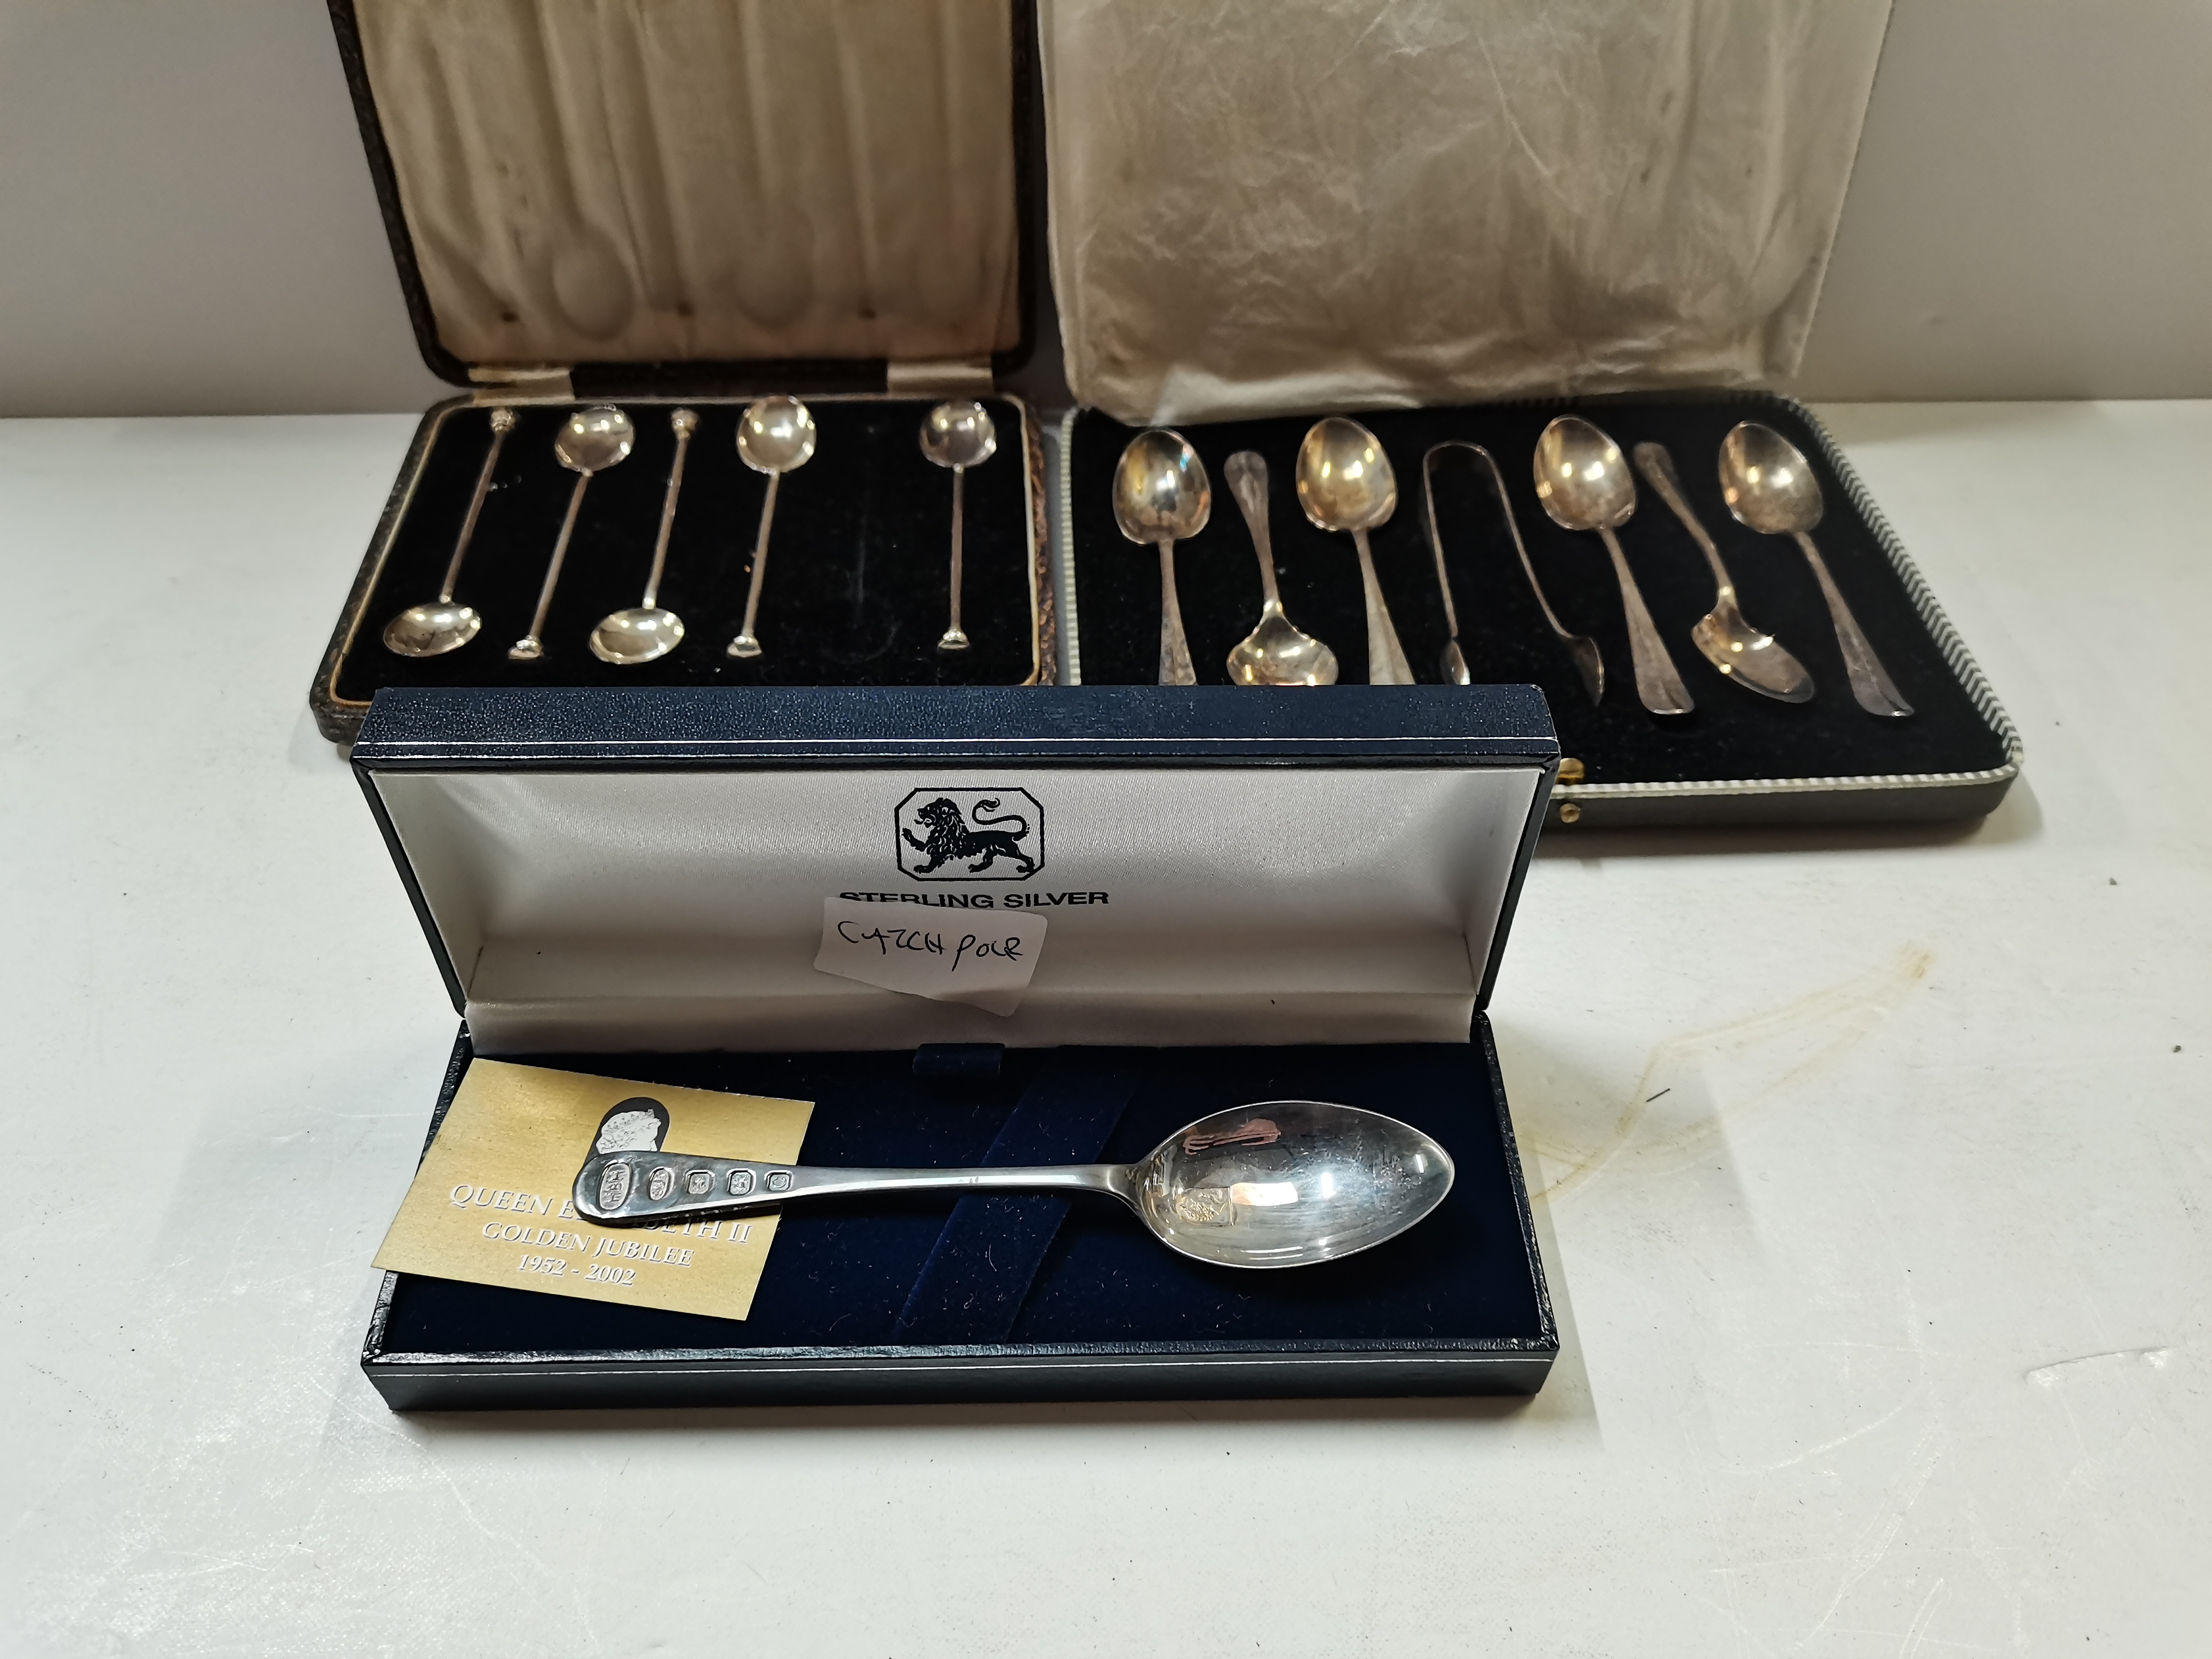 Stirling Silver Golden Jubilee Teaspoon, Boxed set of 6 teaspoons and sugar tongs, set of boxed